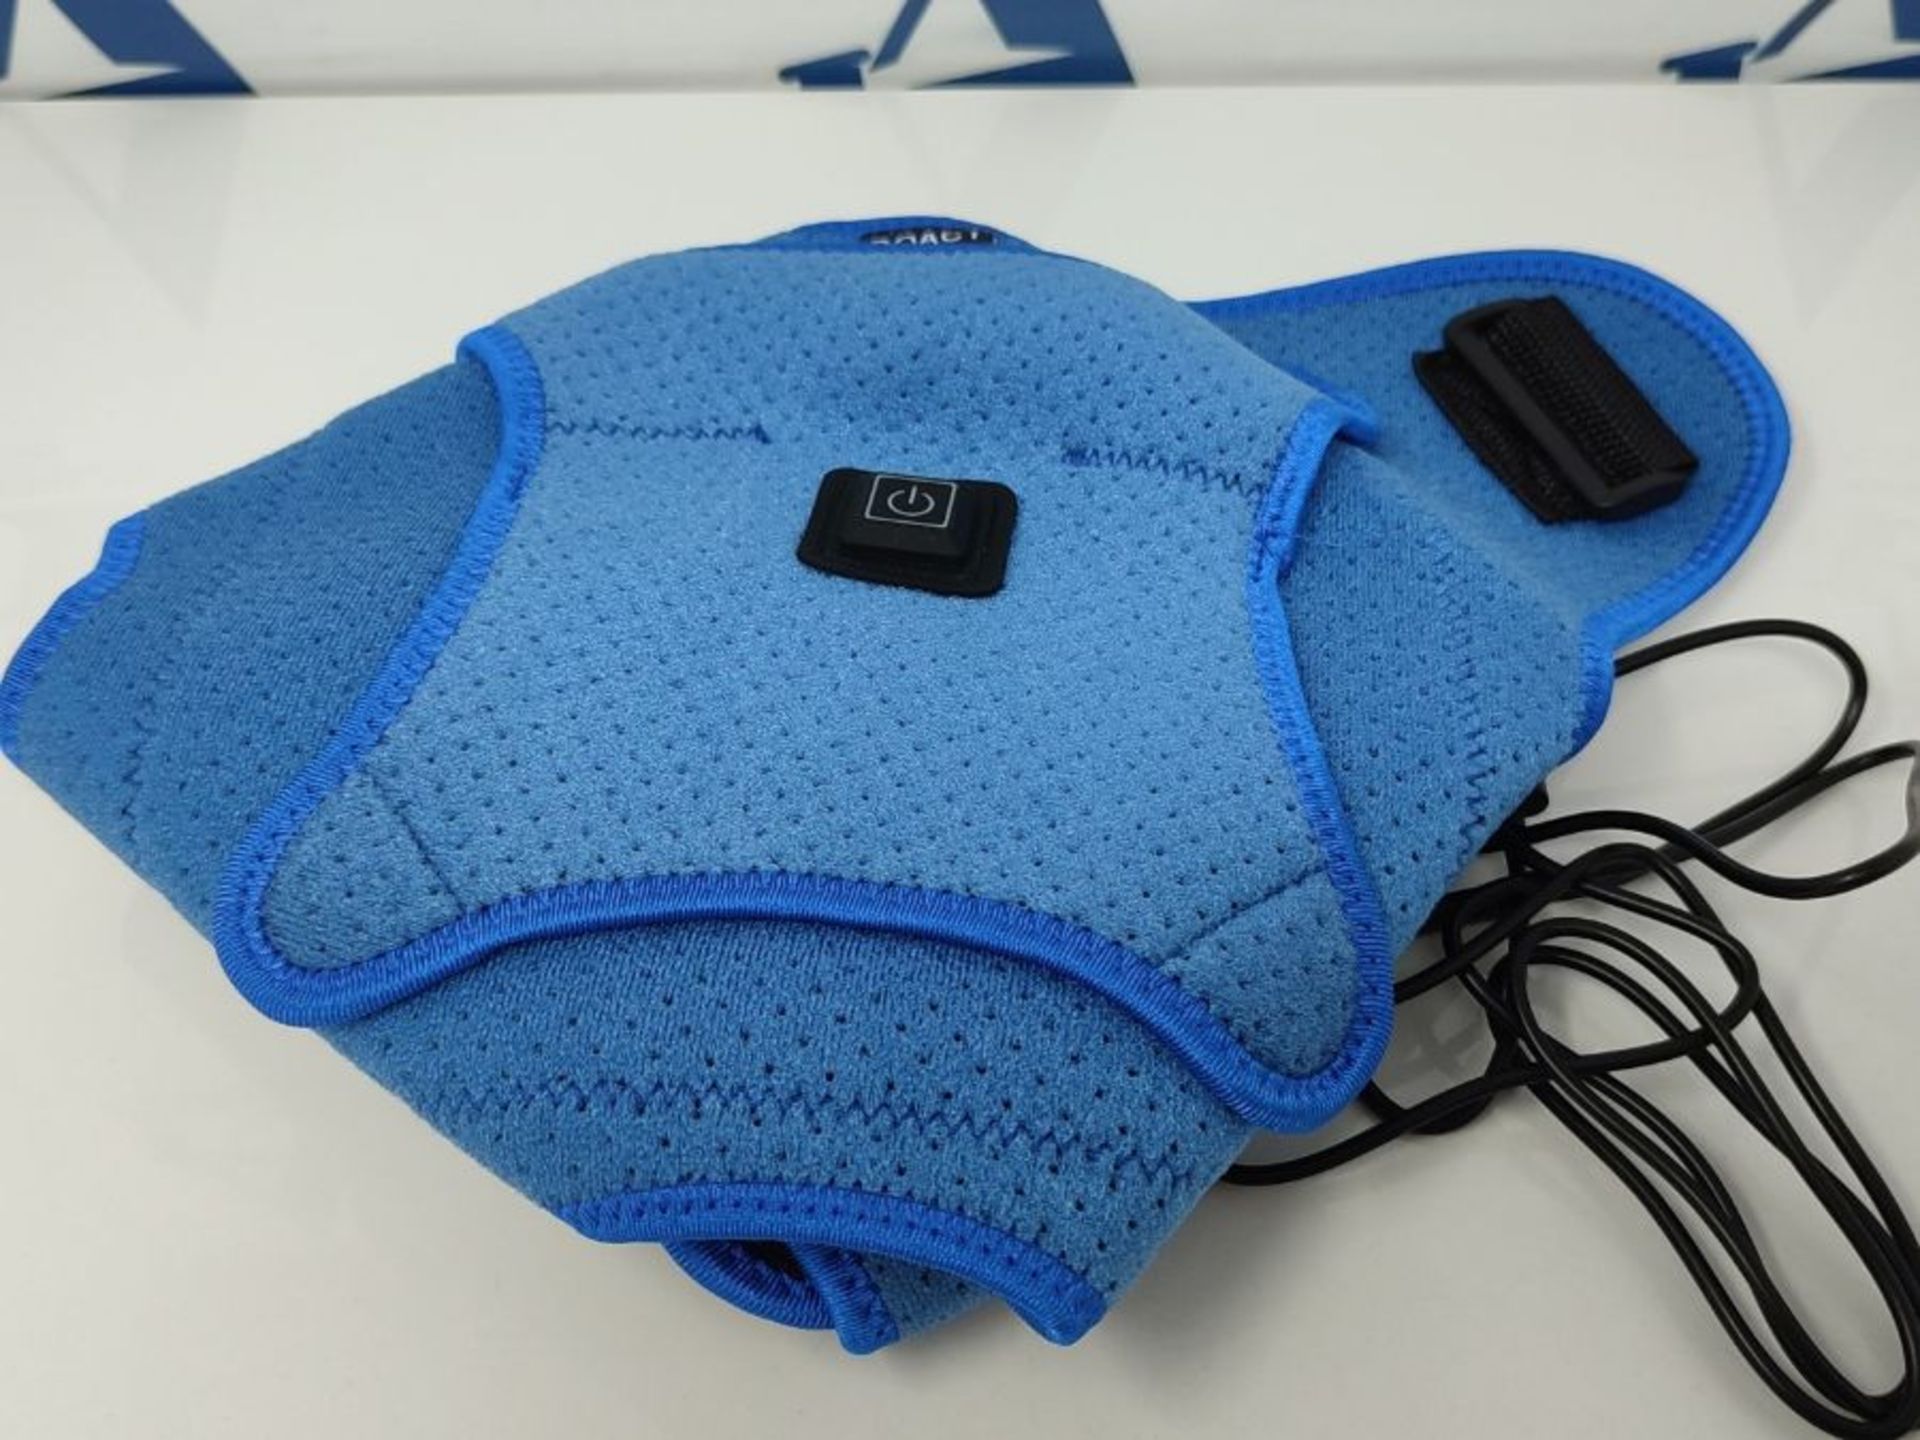 Heated Shoulder Support Brace, Shoulder Heating Pad for Rotator Cuff, Arm Wrap USB Ele - Image 2 of 2